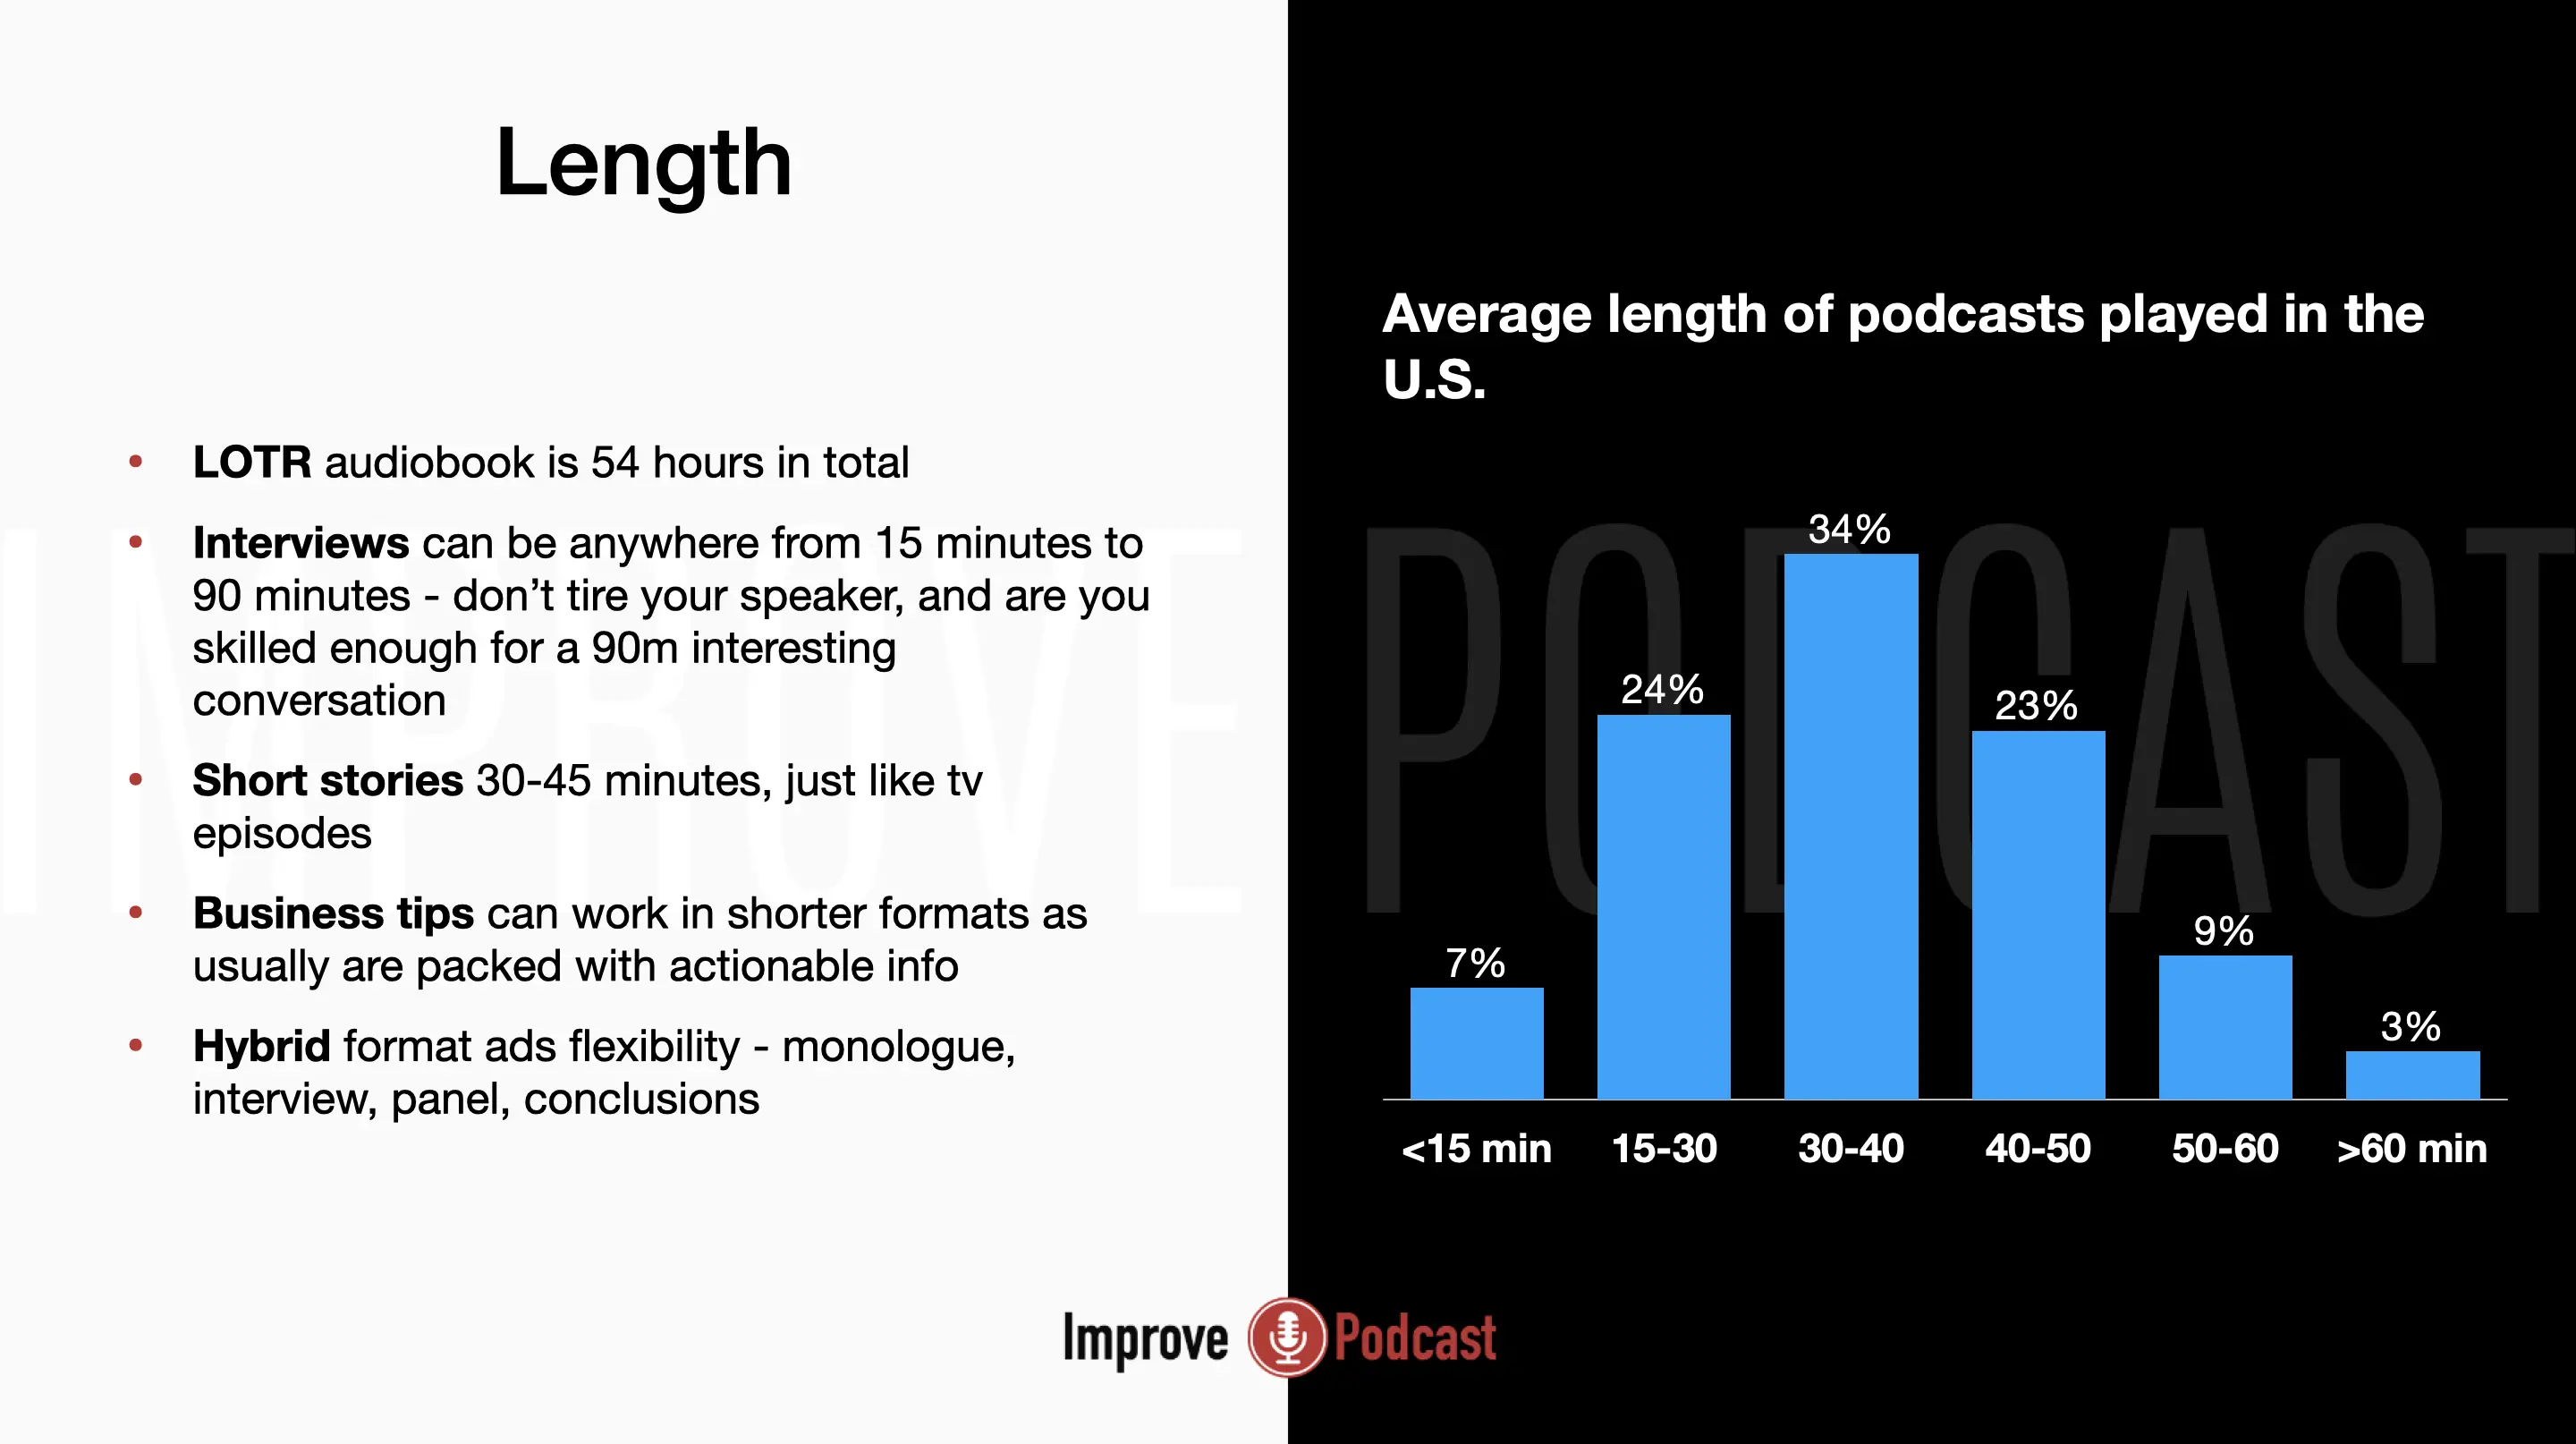 Average length of podcasts played in the U.S. statistics